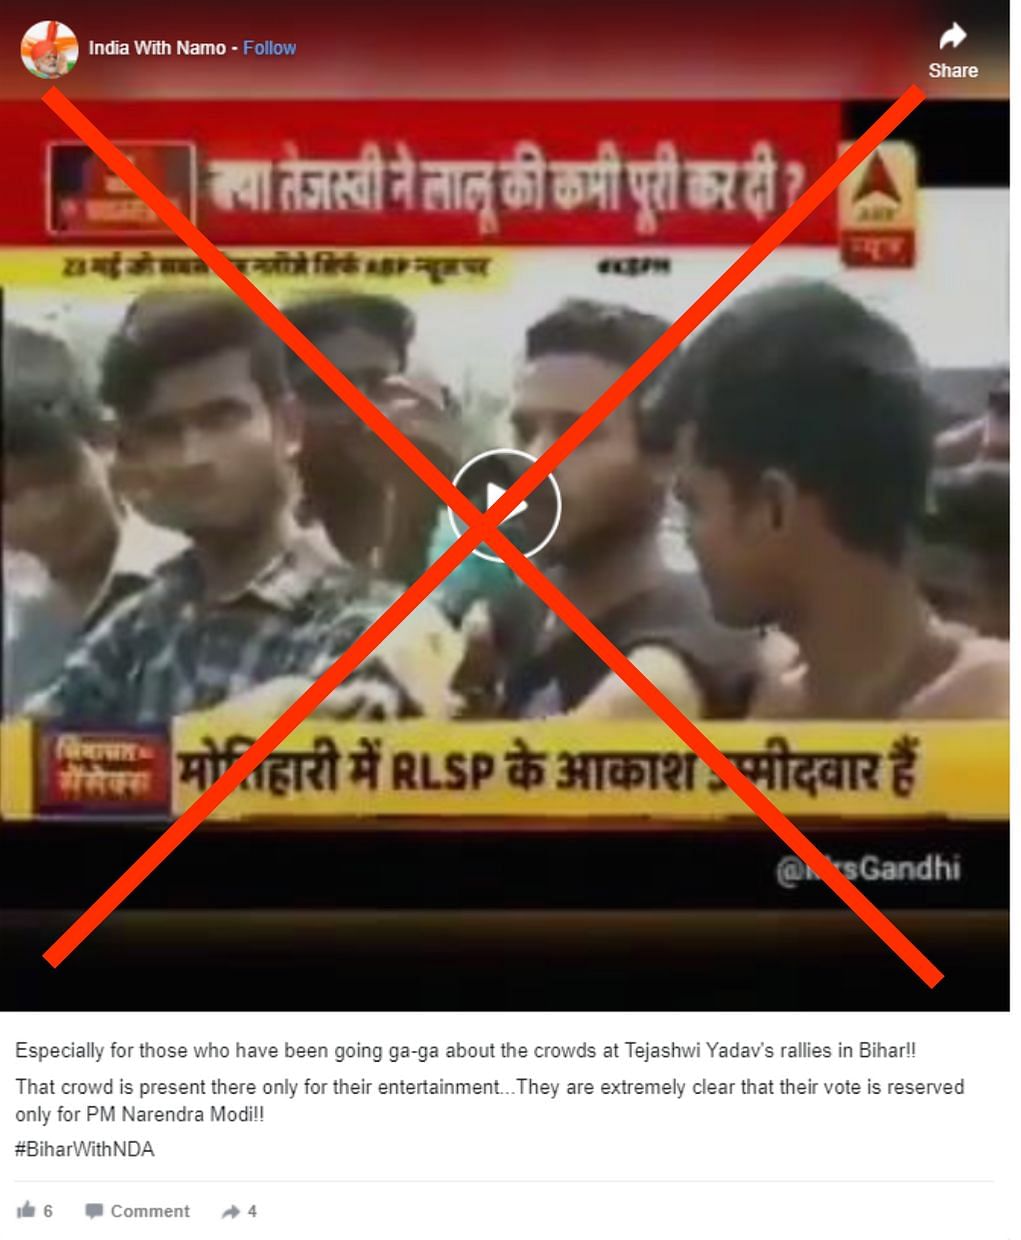 The video shared by Priti Gandhi was from a campaign rally before the Lok Sabha elections of 2019.